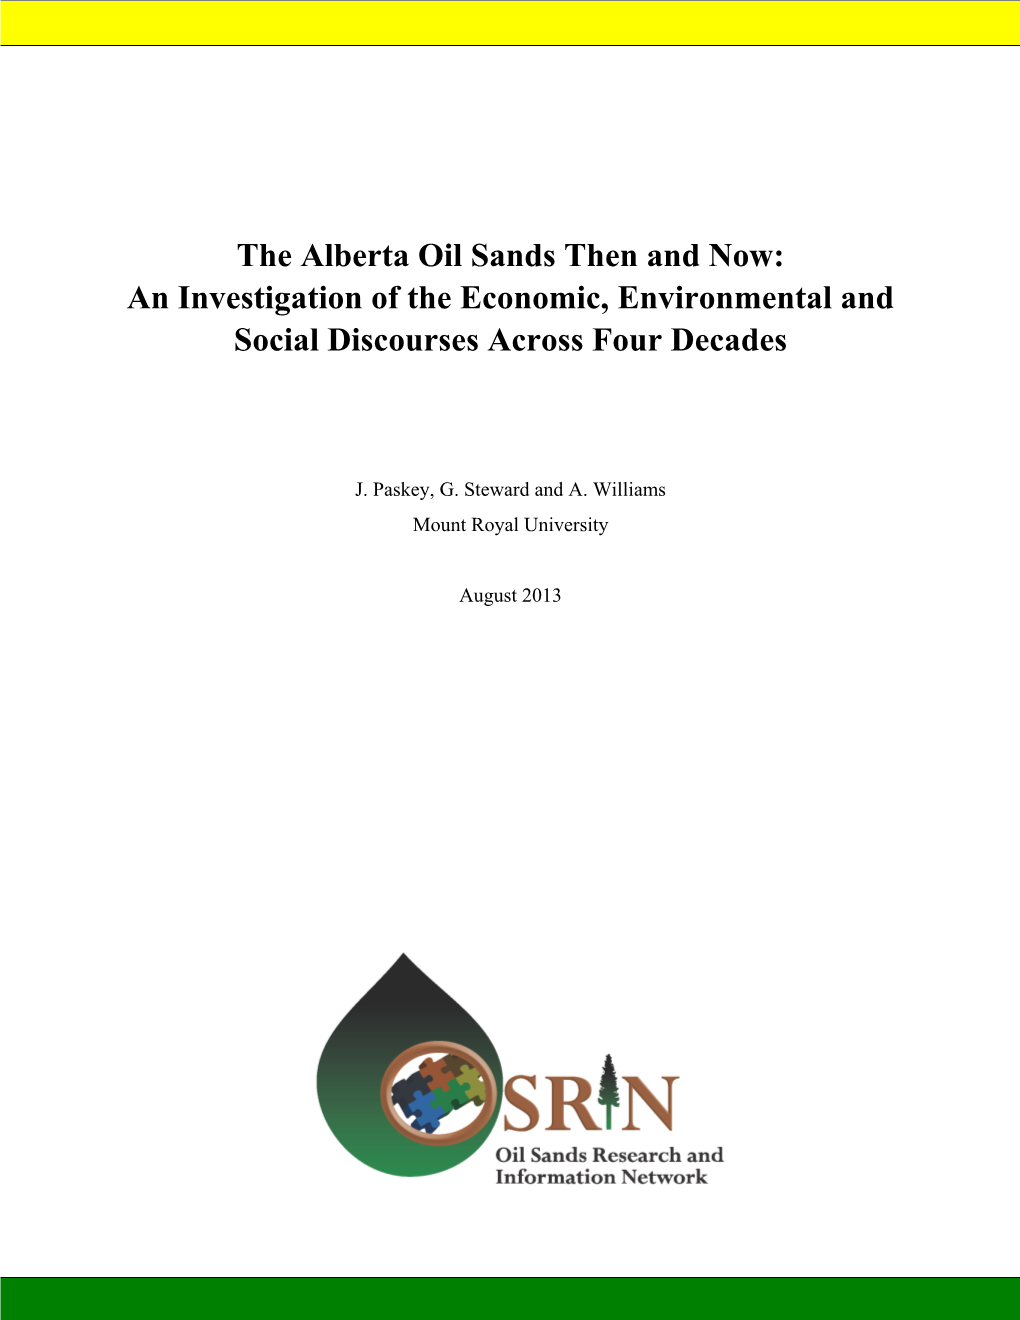 The Alberta Oil Sands Then and Now: an Investigation of the Economic, Environmental and Social Discourses Across Four Decades